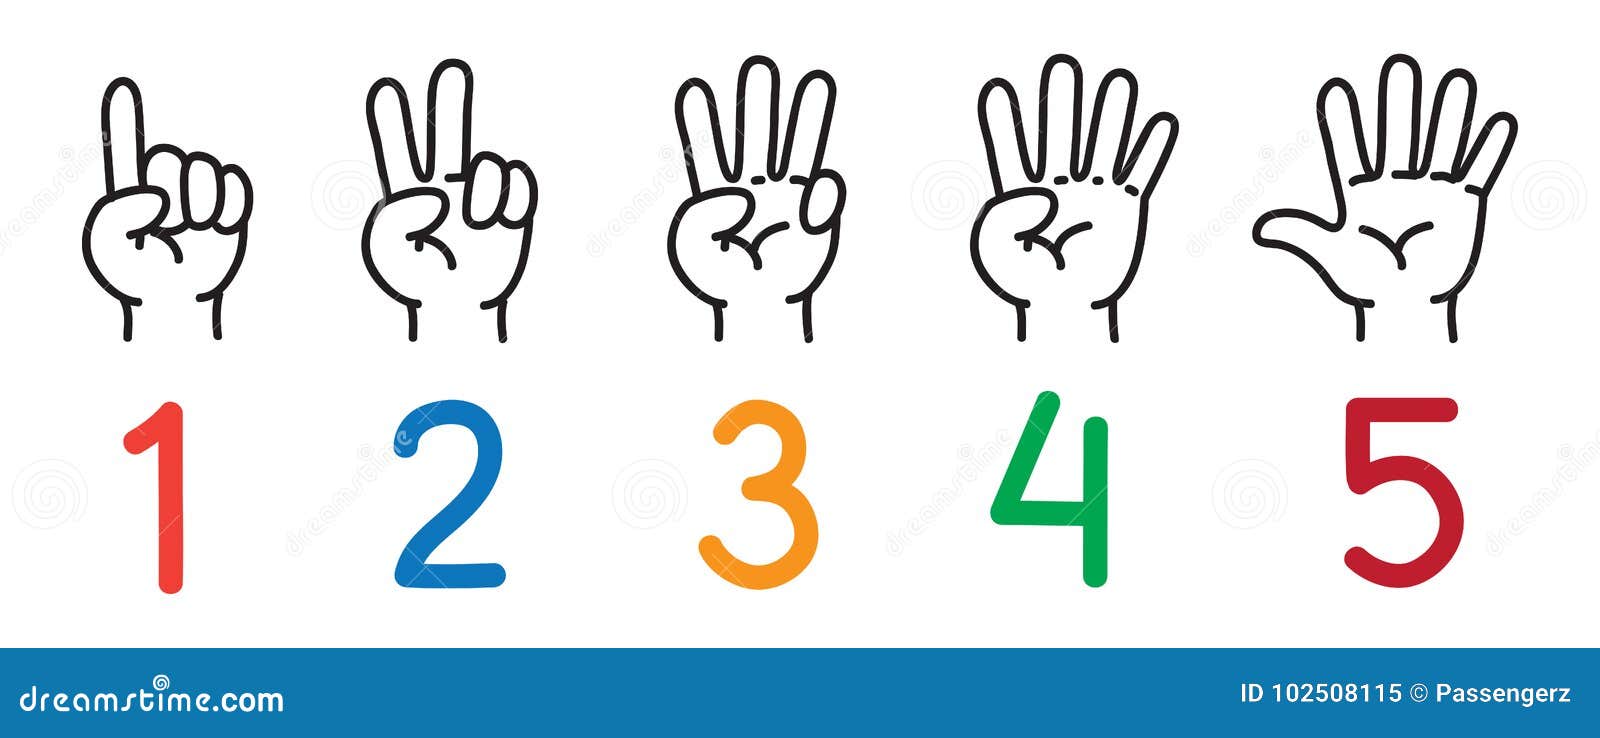 hands with fingers.icon set for counting education